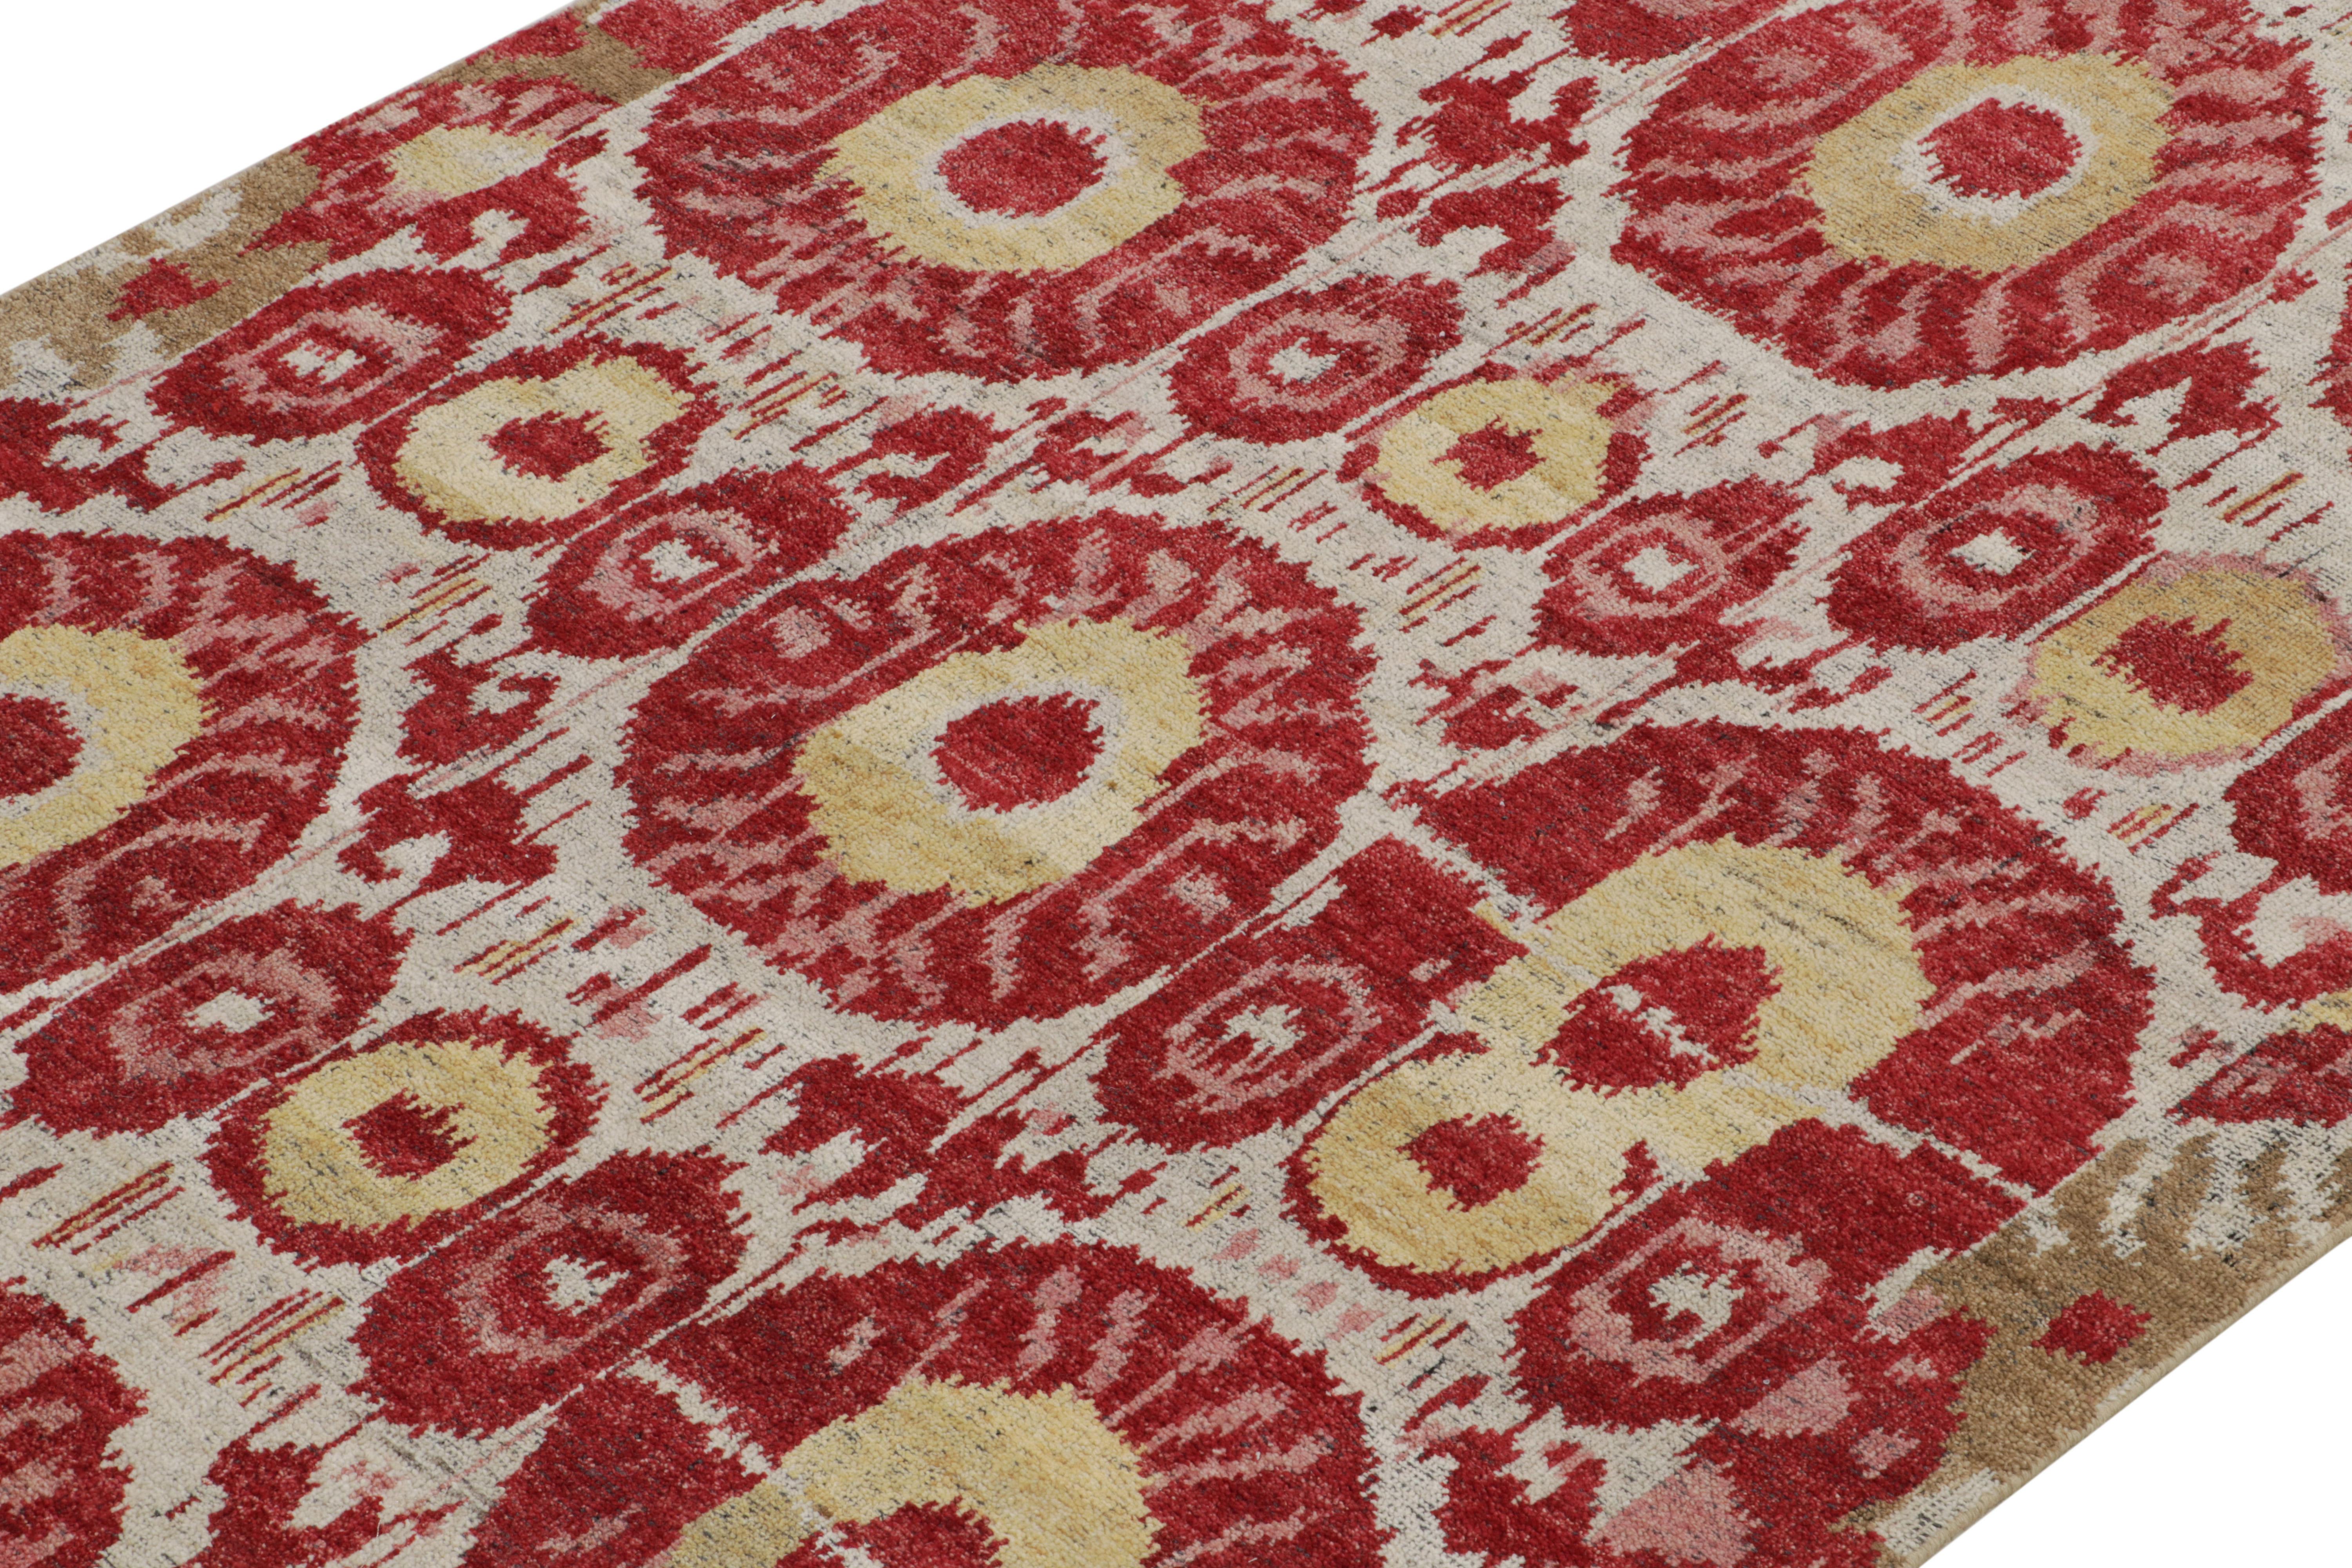 Hand-Knotted Rug & Kilim's Tribal Style rug in Red, Yellow, Green, White Ikats Pattern For Sale